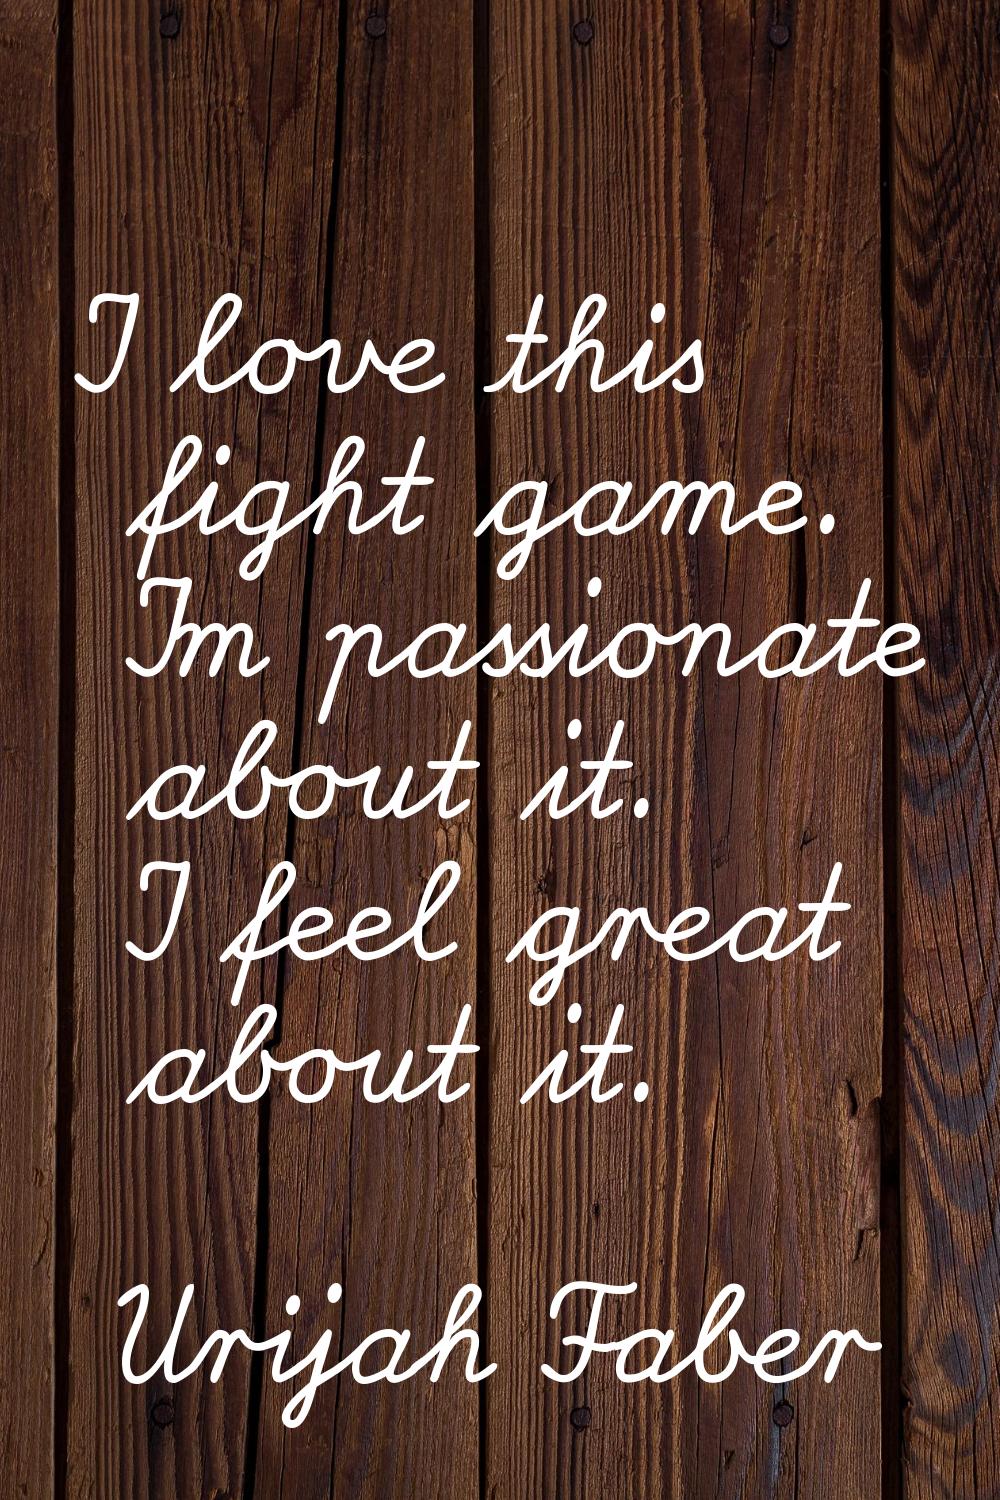 I love this fight game. I'm passionate about it. I feel great about it.